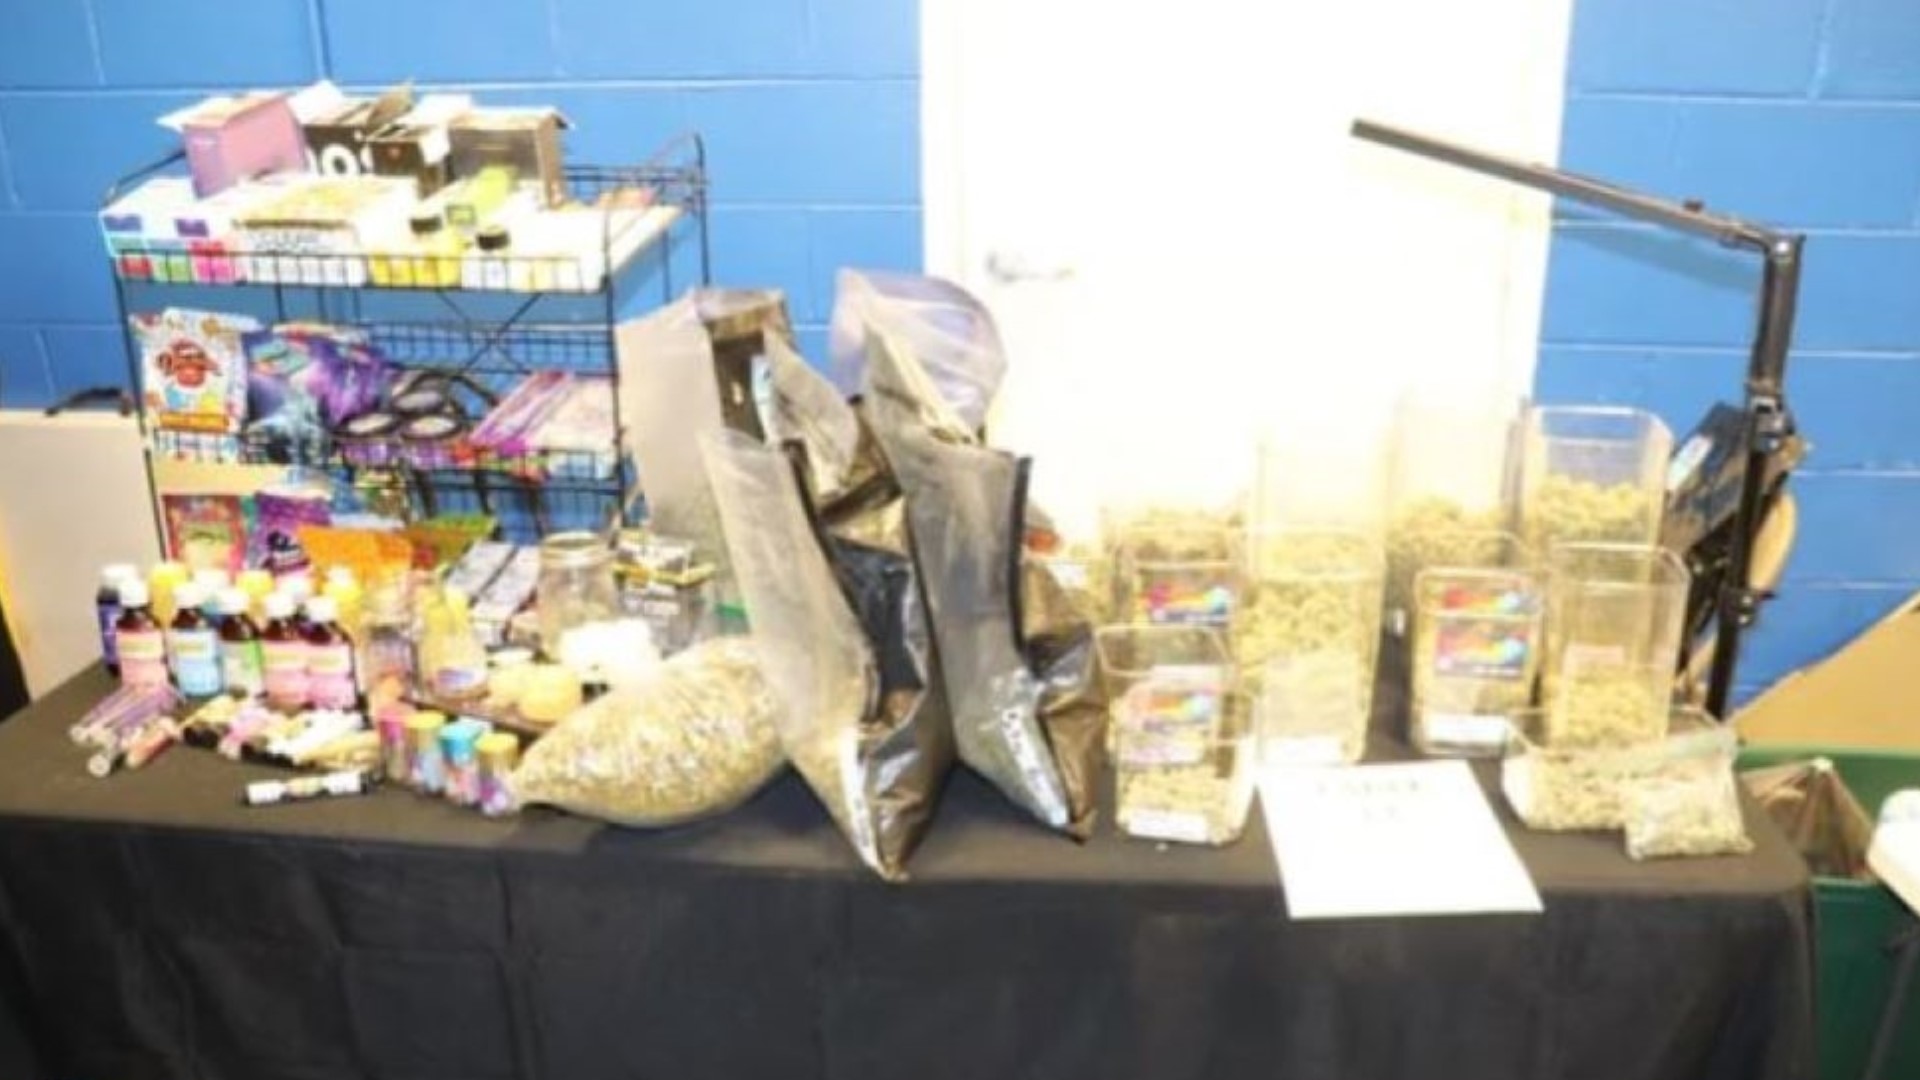 More than $2 million in drugs and guns were seized at an illegal "pop-up pot shop" in Newport News.